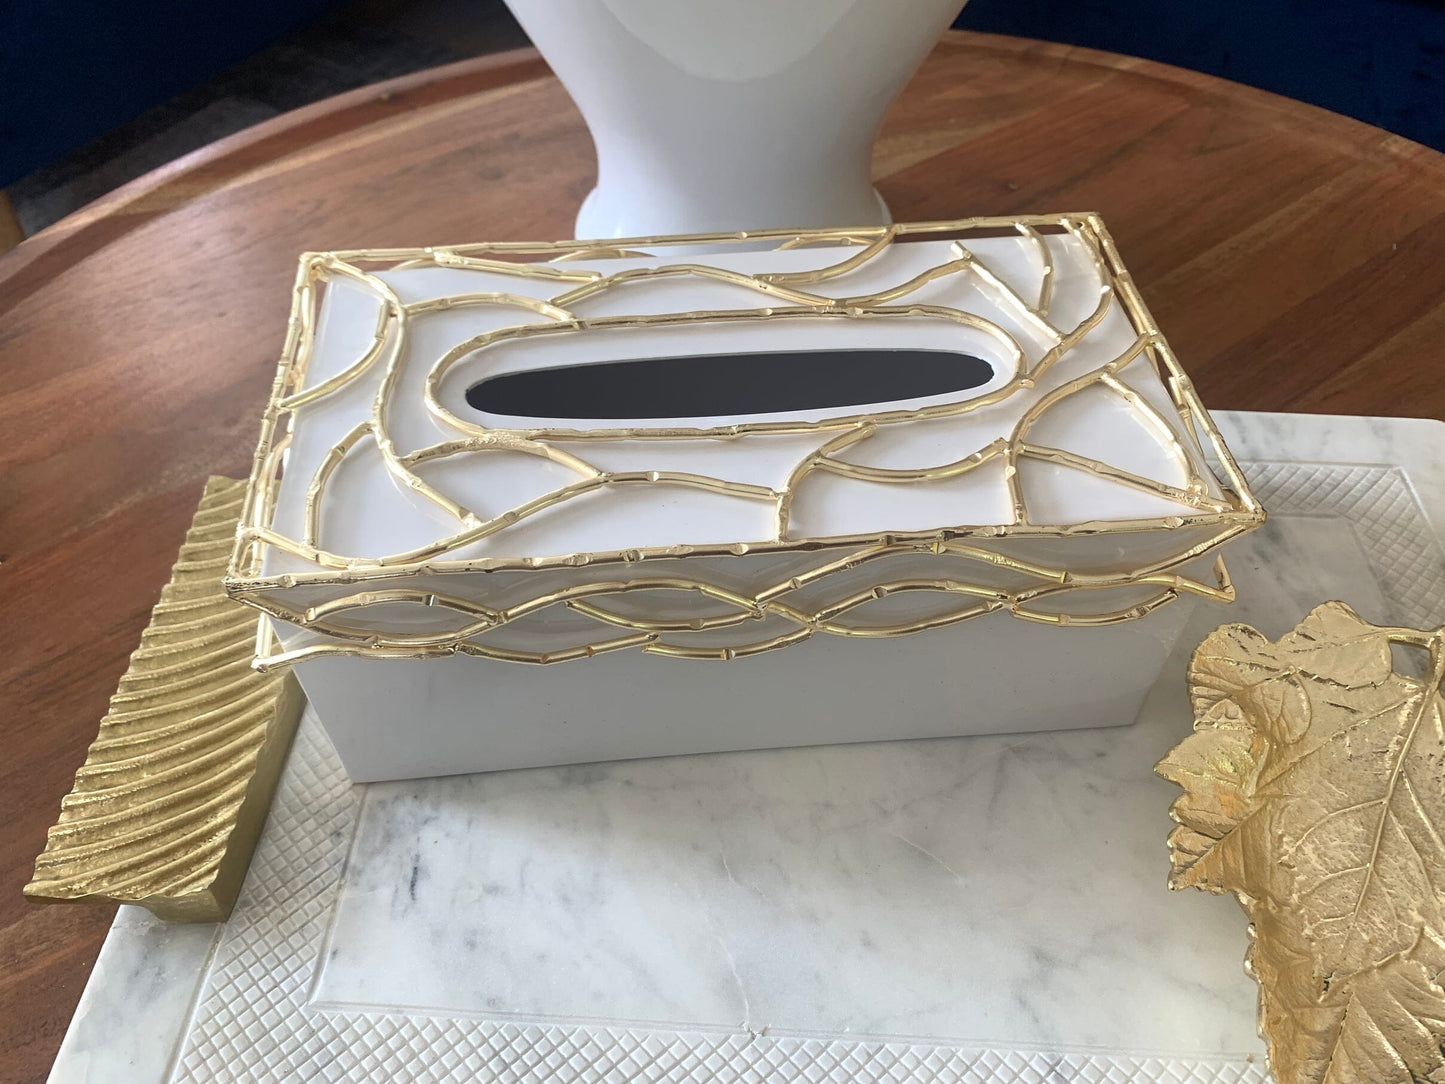 White Tissue Box Gold Mesh Design on Cover Facial Tissue Holders High Class Touch - Home Decor 